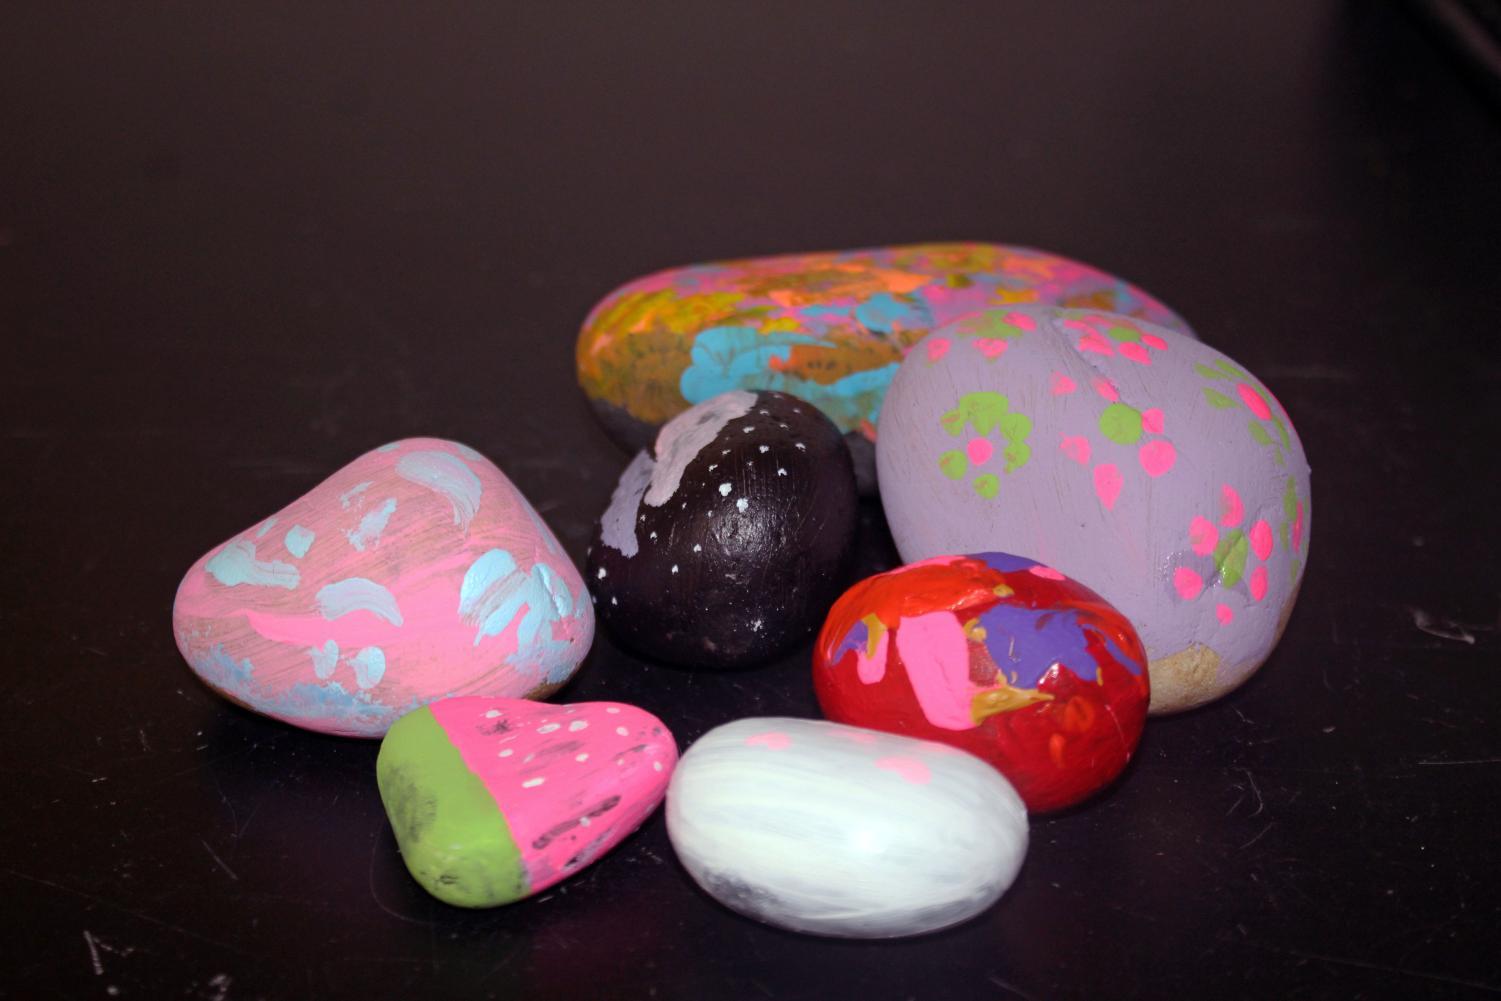 Rocks painted by students from the Kindness Rock activity.